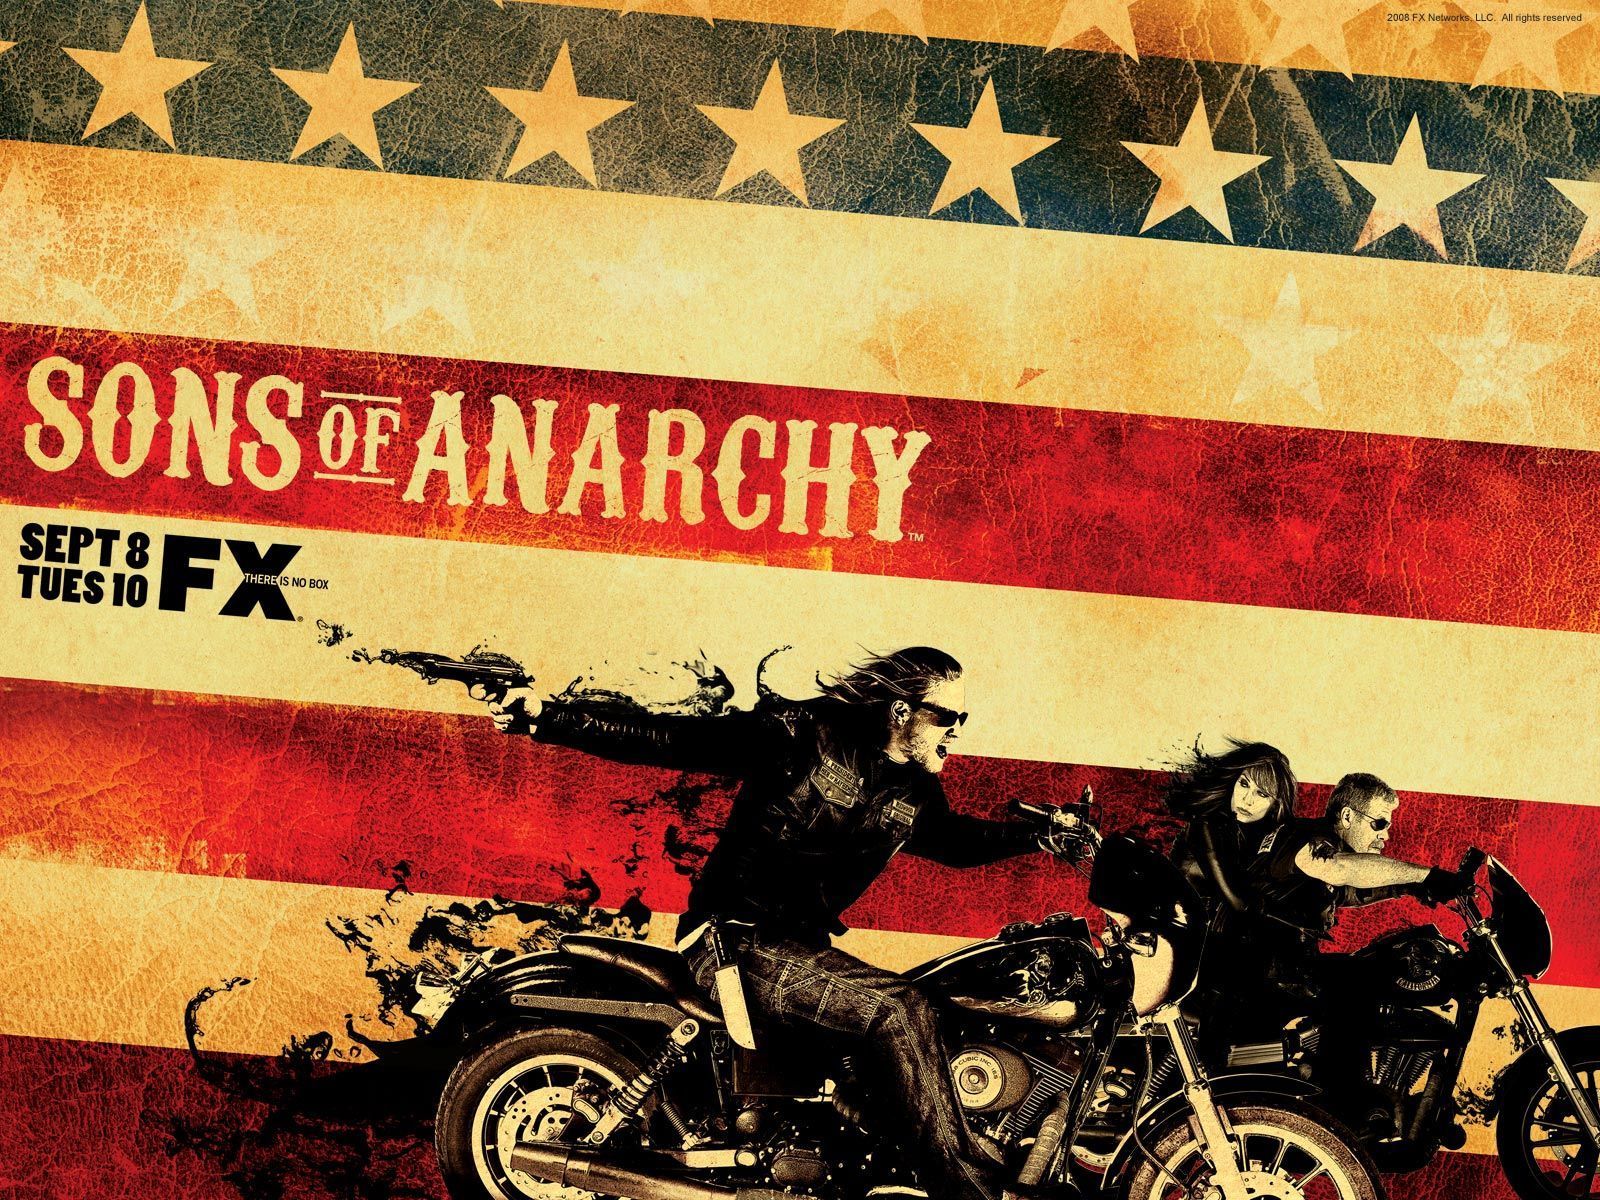 Sons Of Anarchy Free Desktop Wallpapers for HD, Widescreen and other